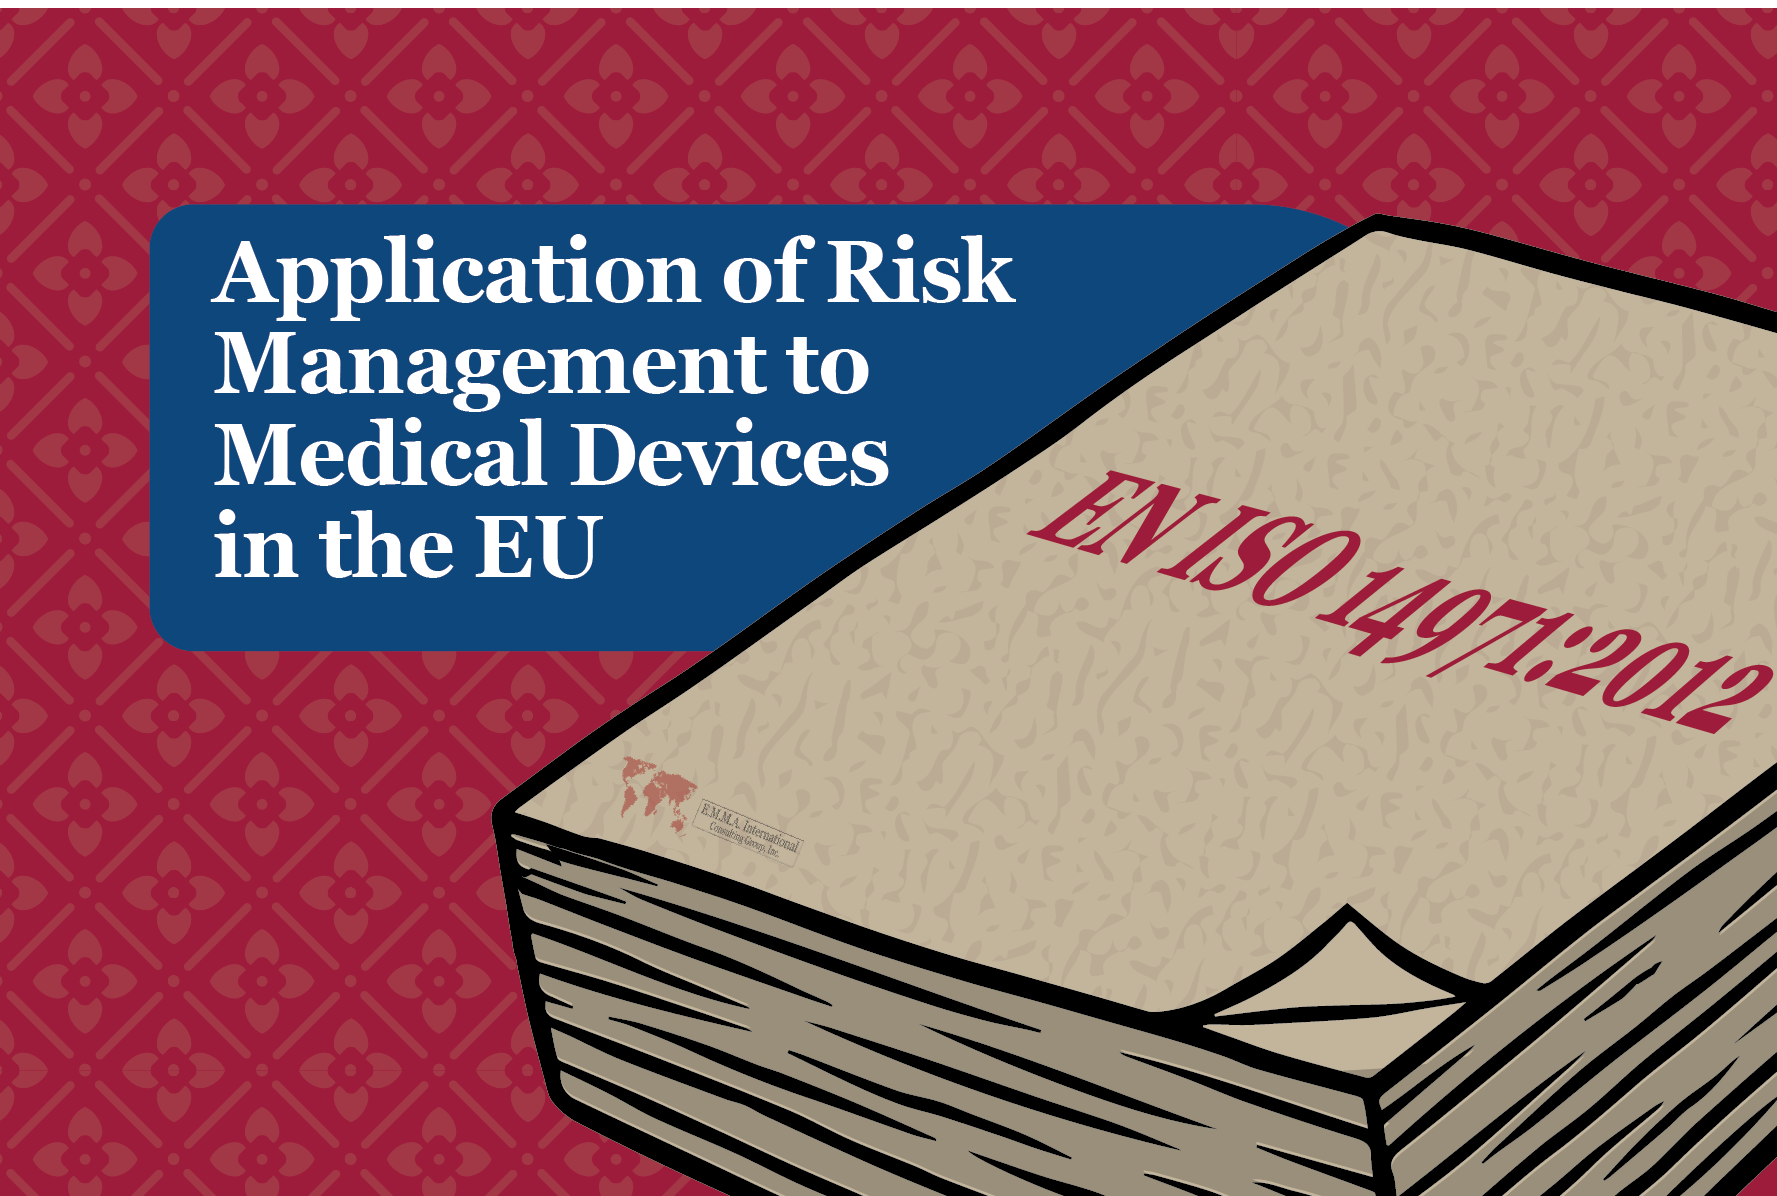 Application of Risk Management to Medical Devices in the EU